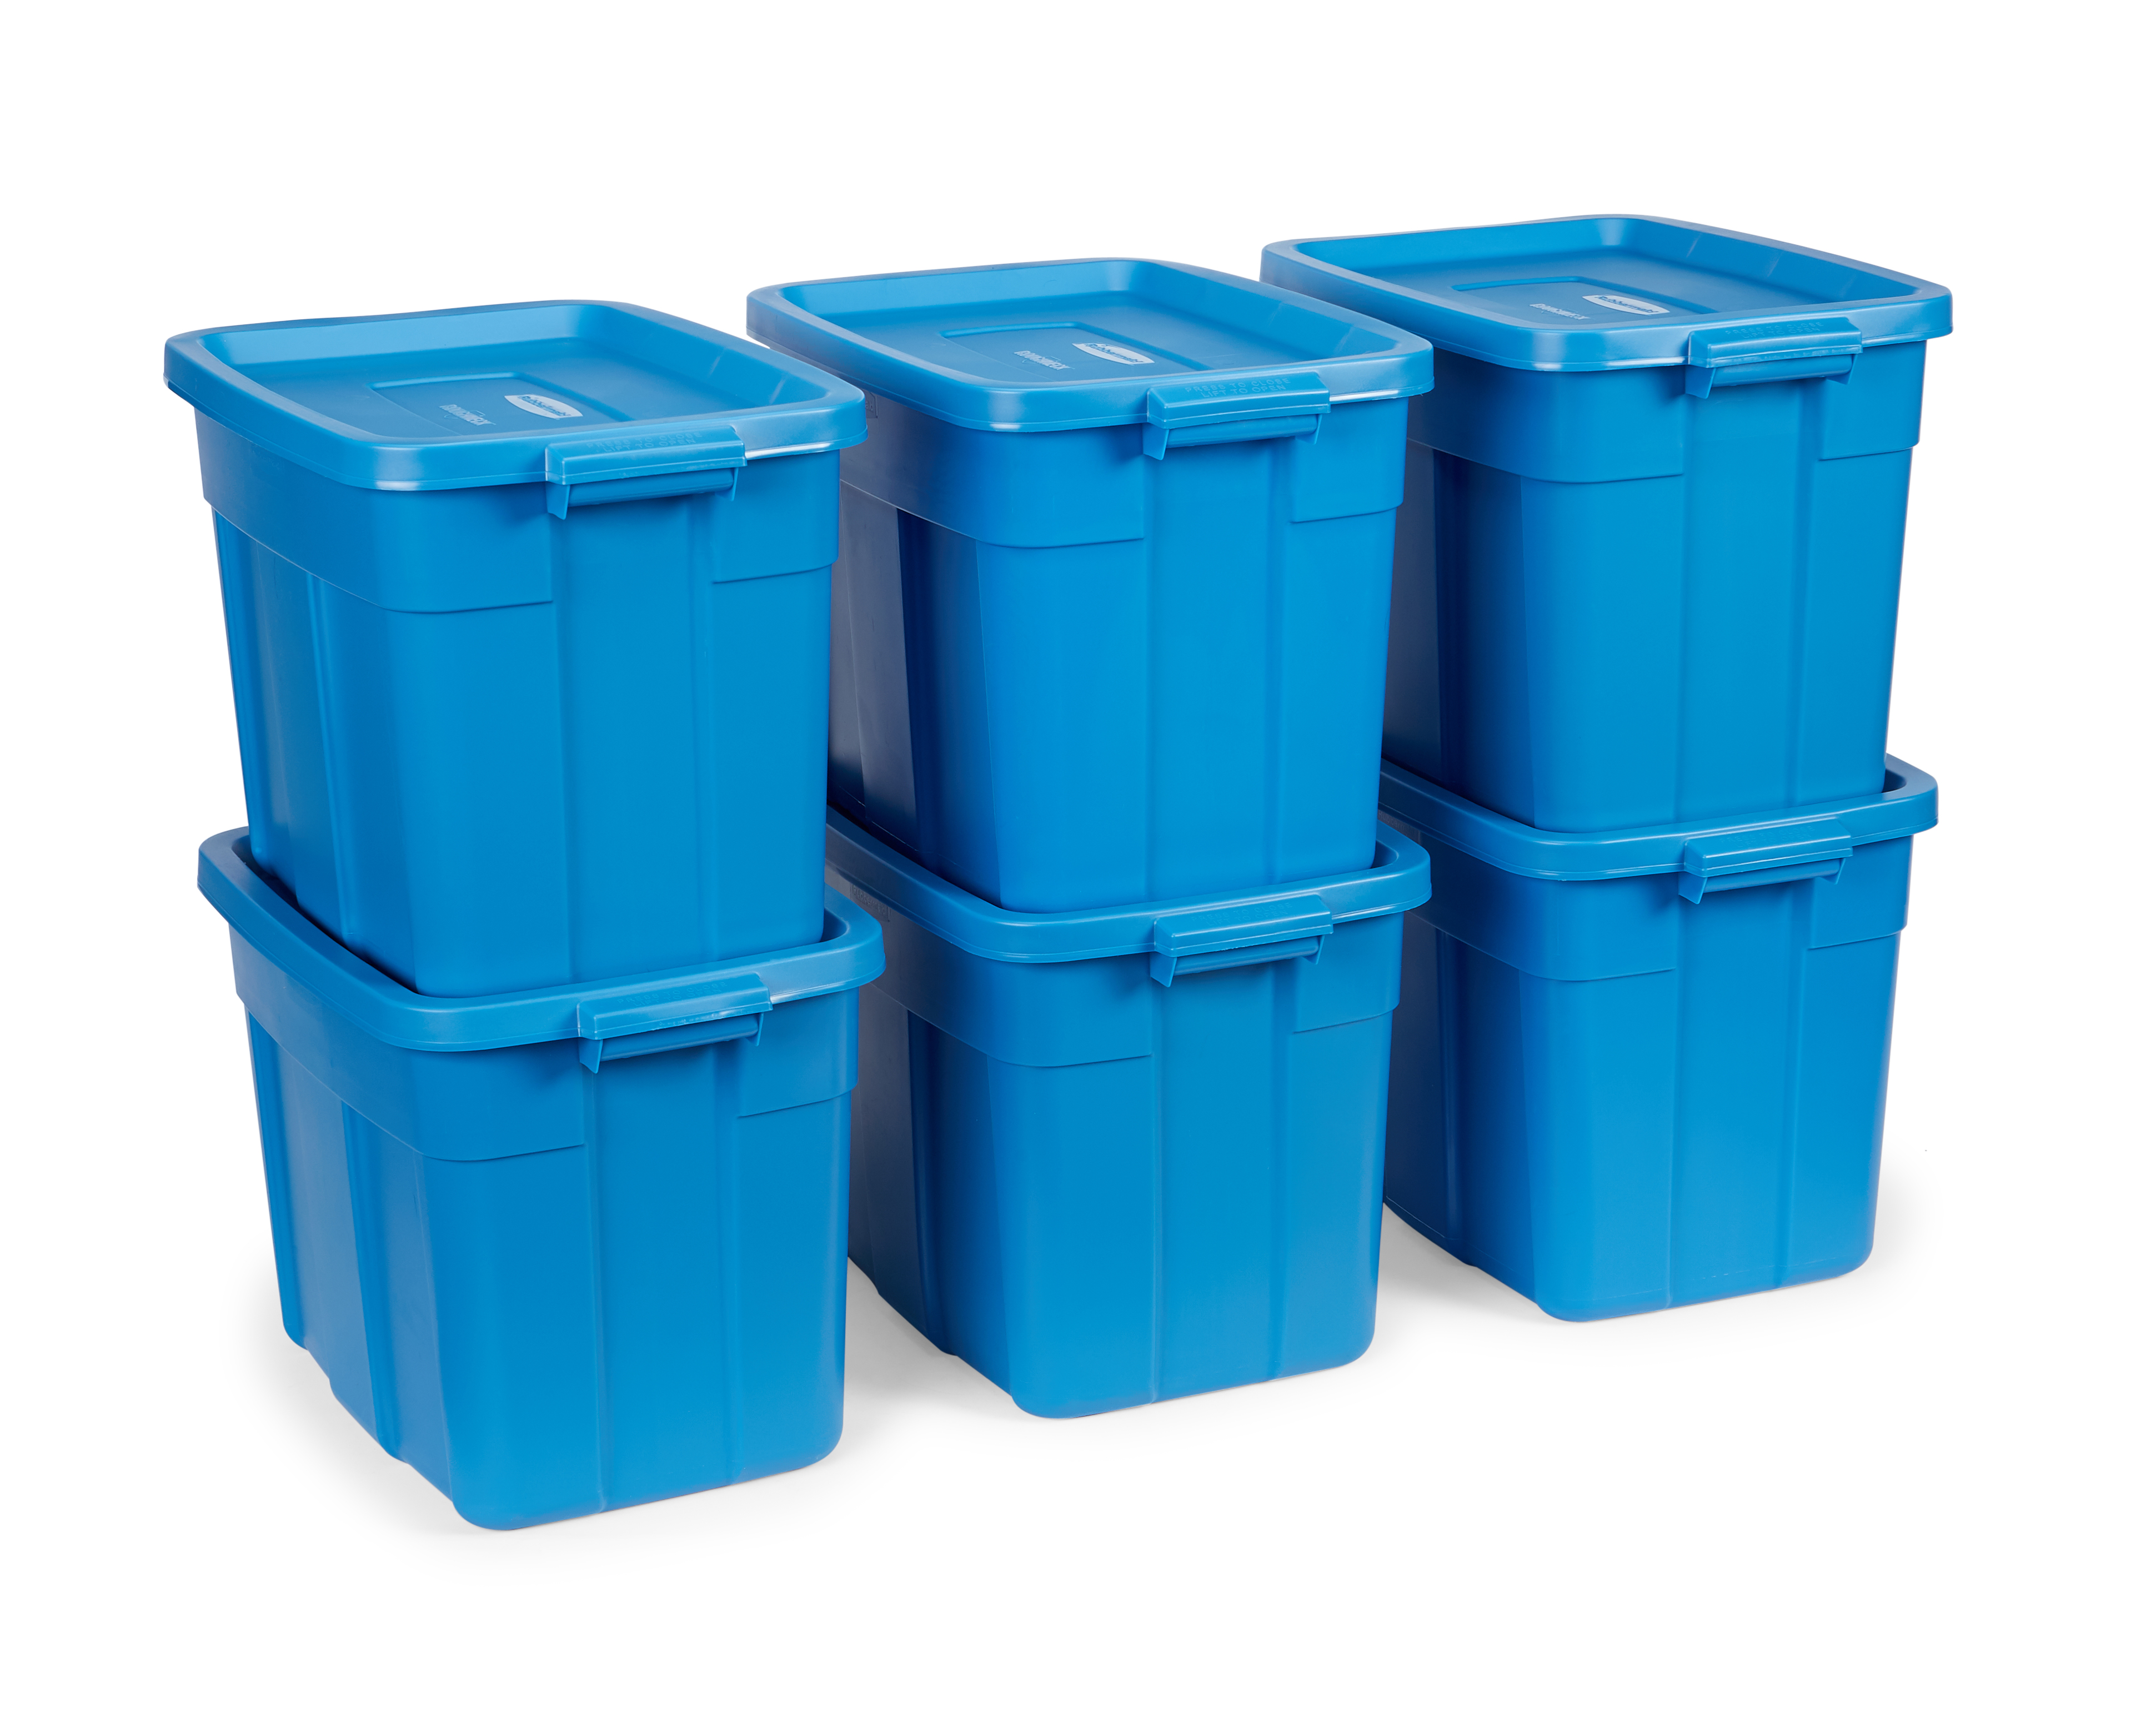 Rubbermaid Roughneck Tote 18 Gal Storage Container, Heritage Blue (6 Pack) - image 1 of 5